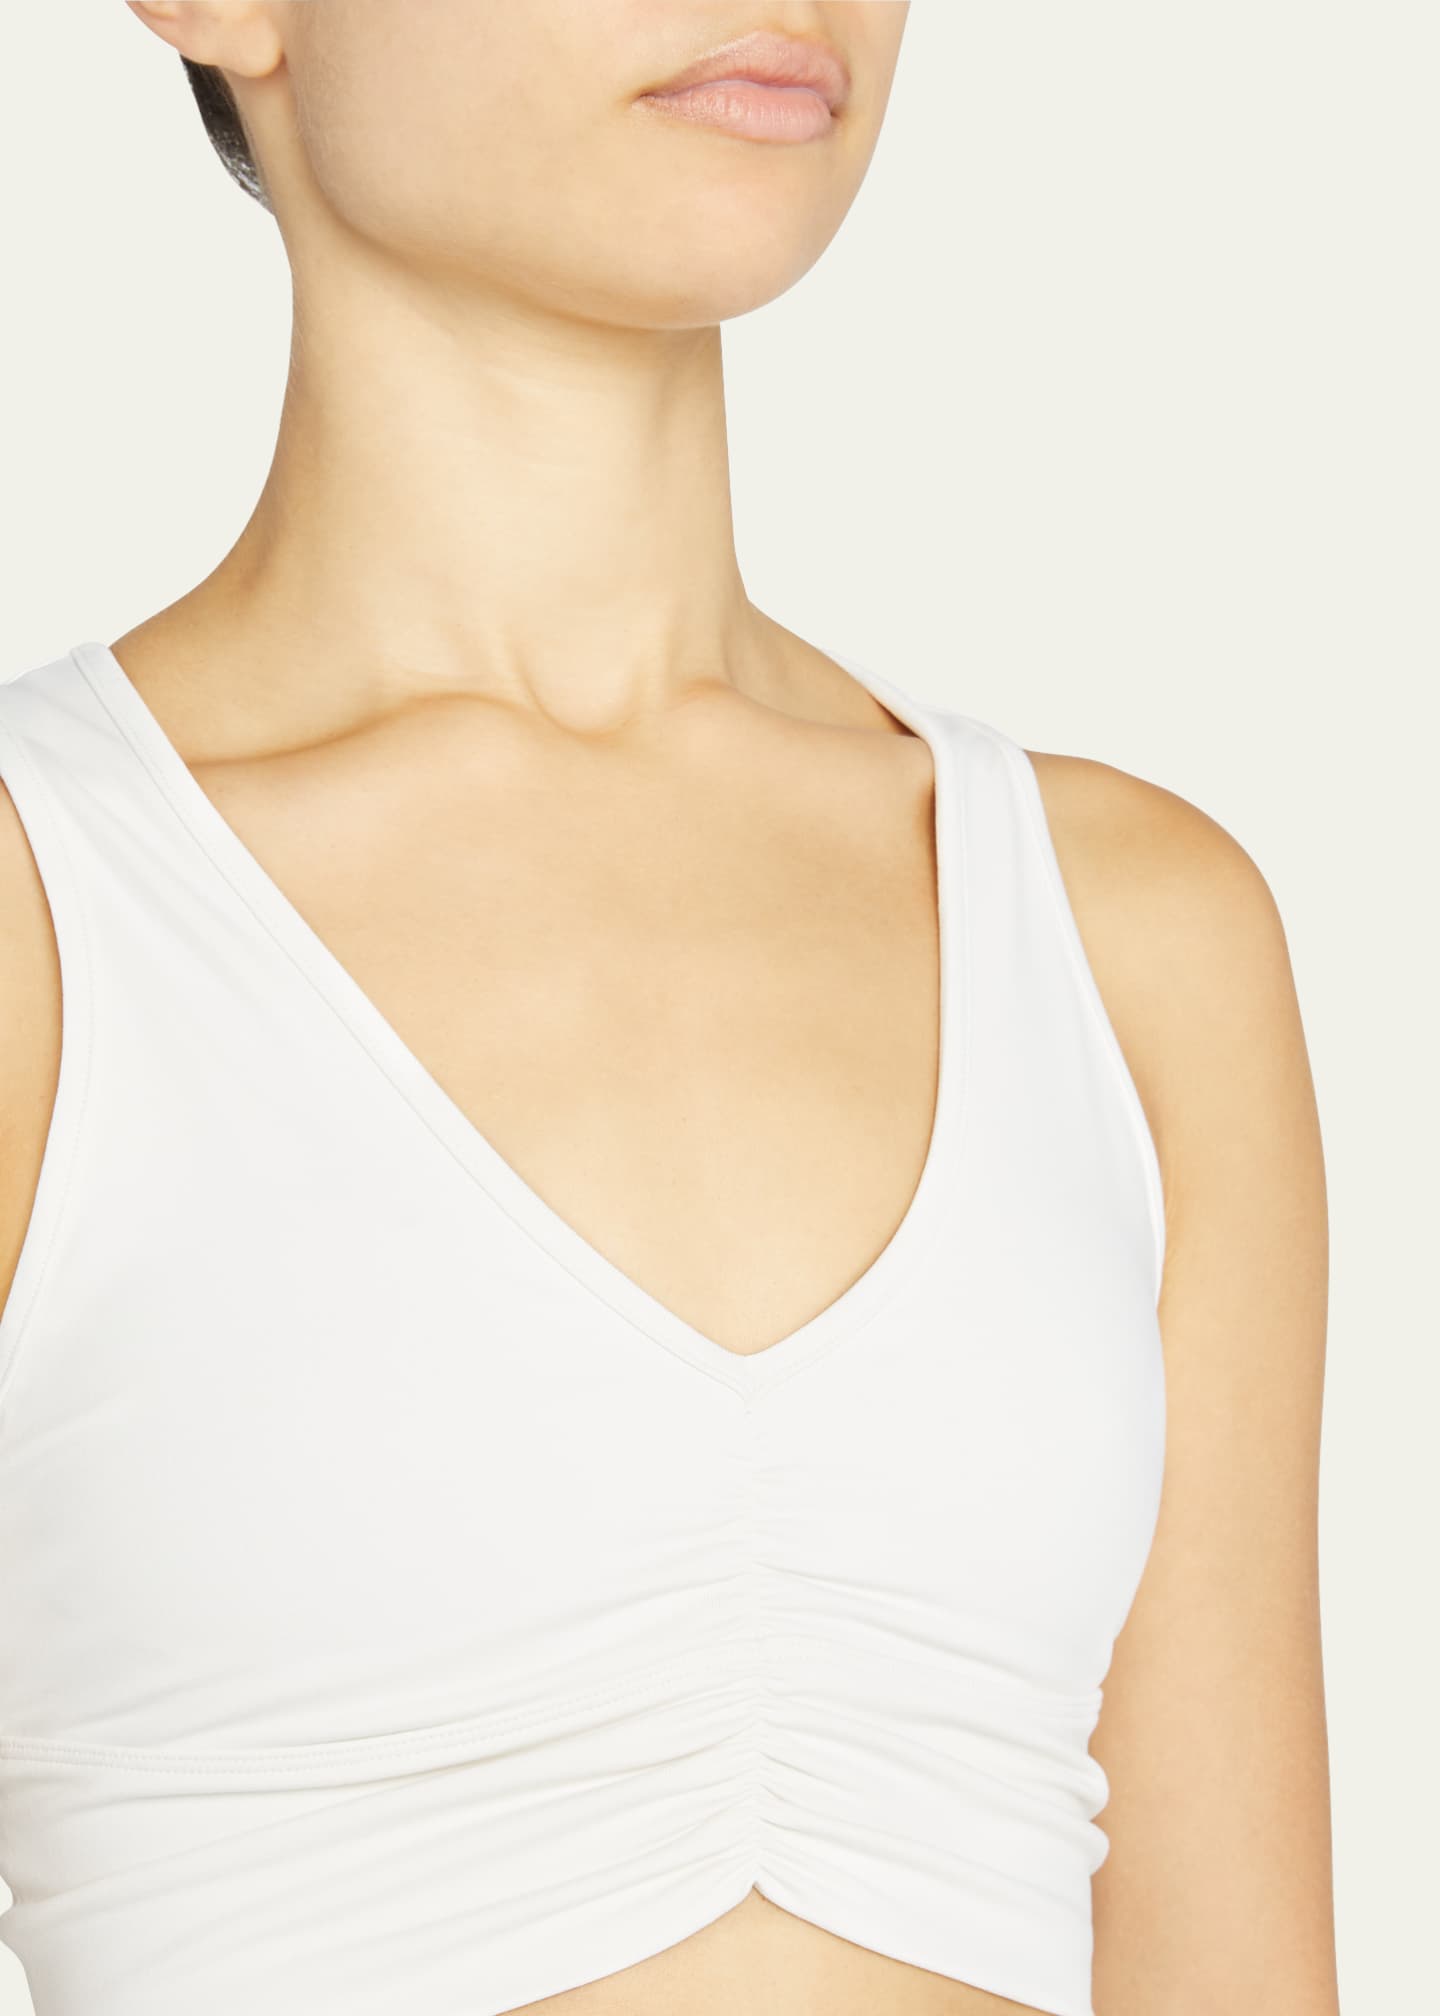 Wild Thing Sports Bra by LNDR at ORCHARD MILE